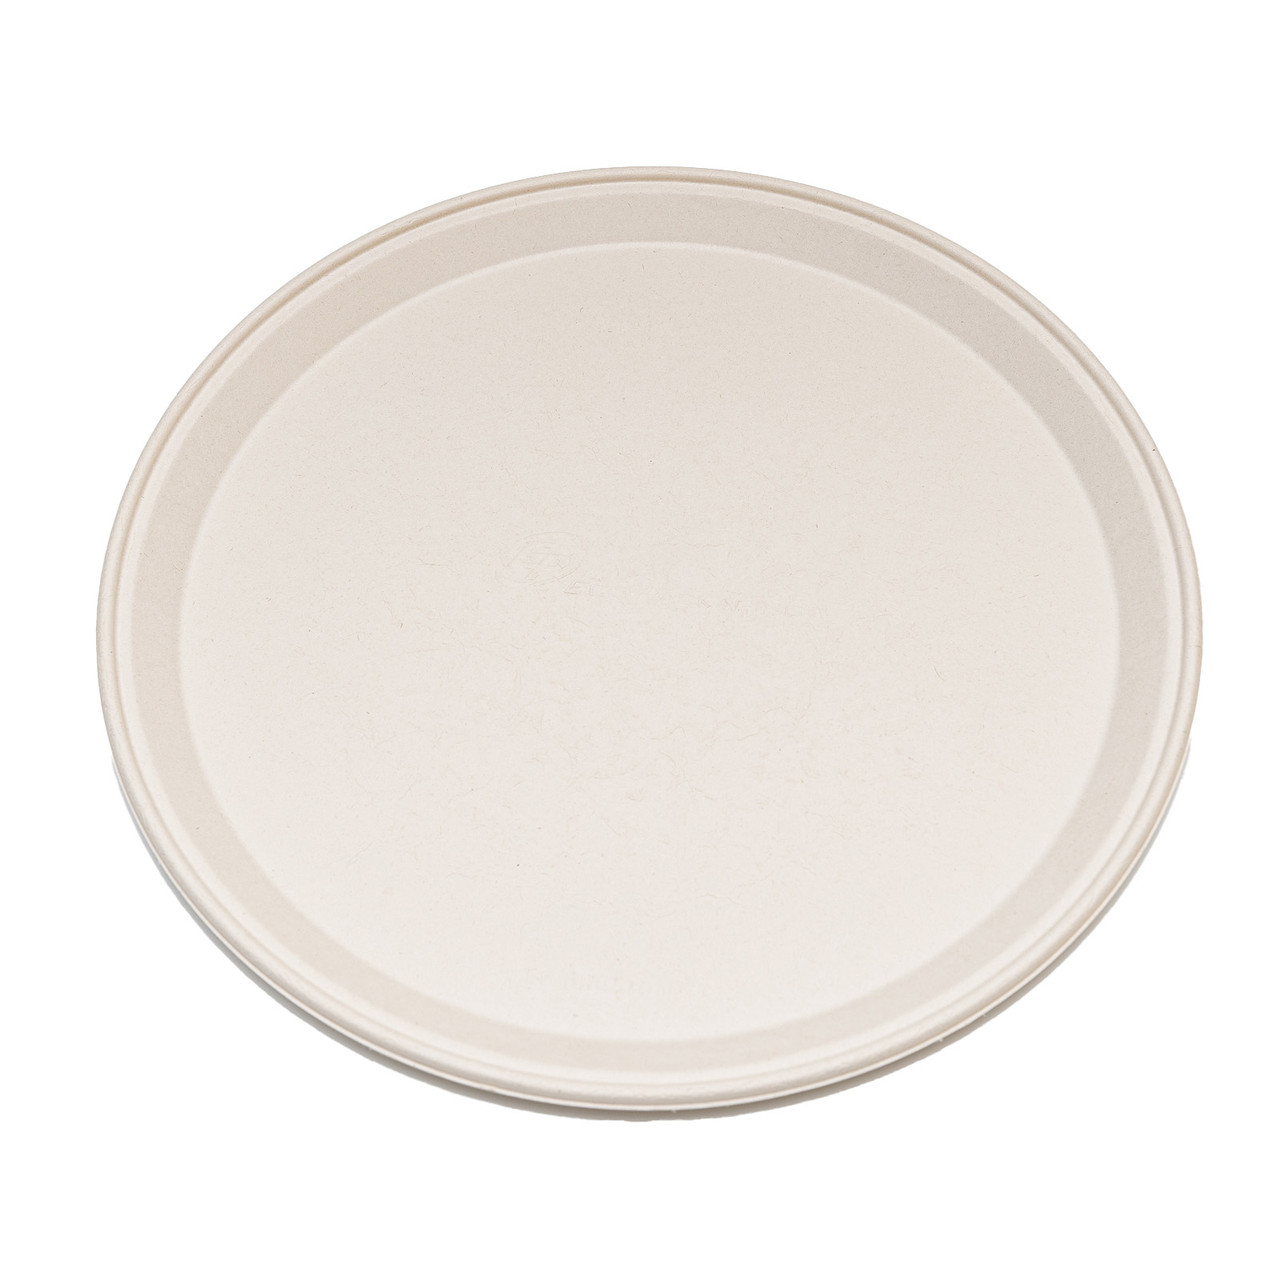 16" Round Fiber Catering Tray